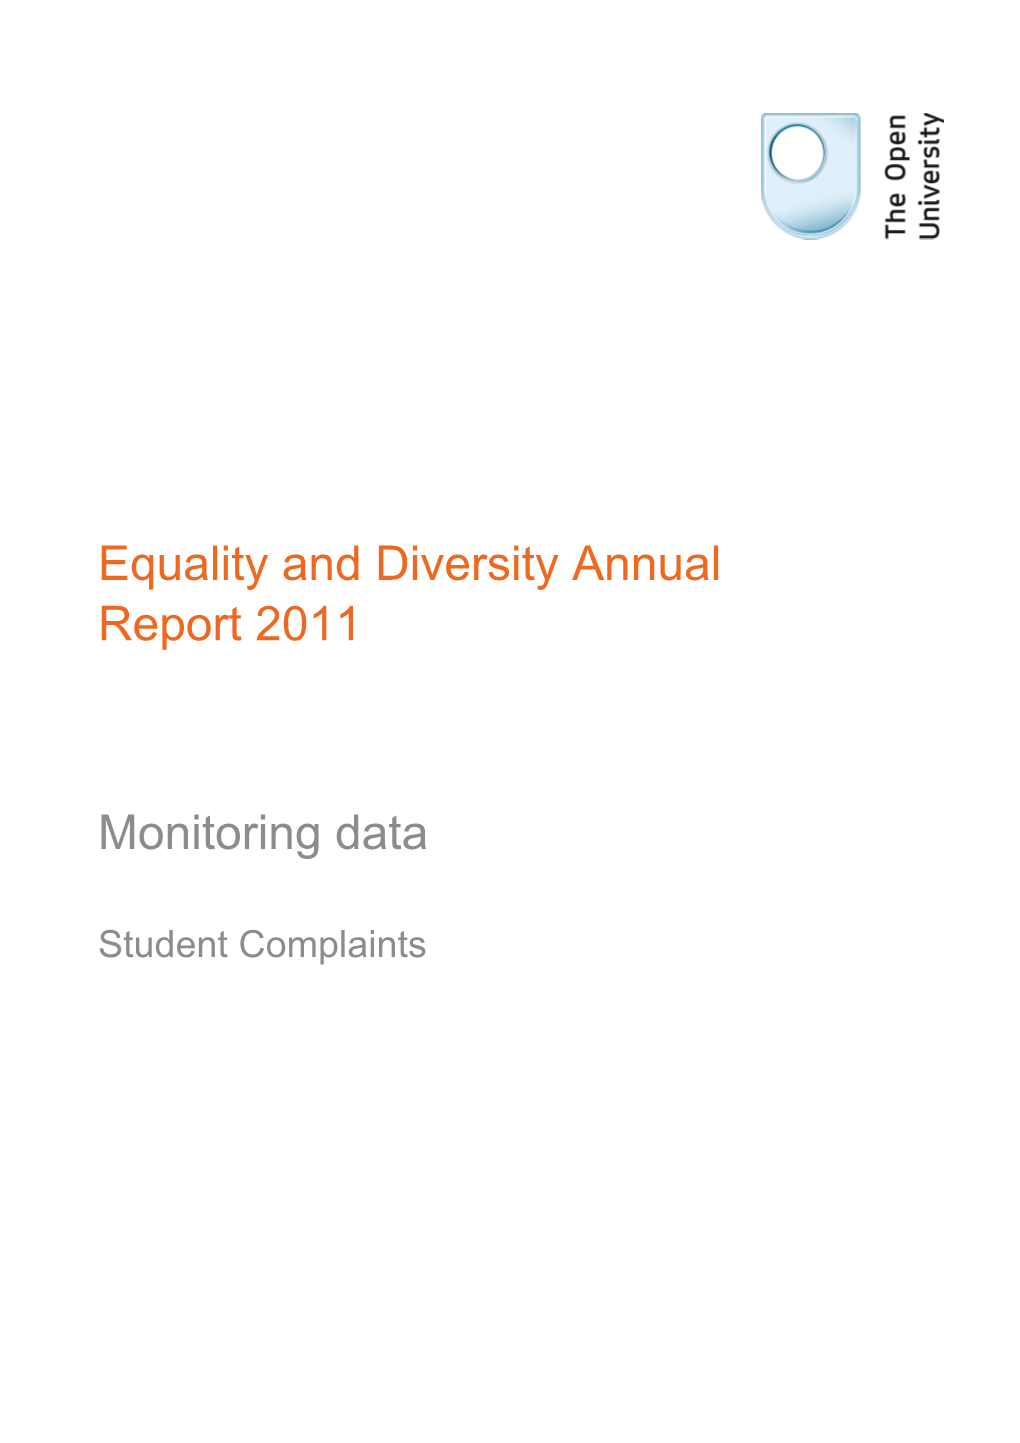 Equality and Diversity Annual Report 2011